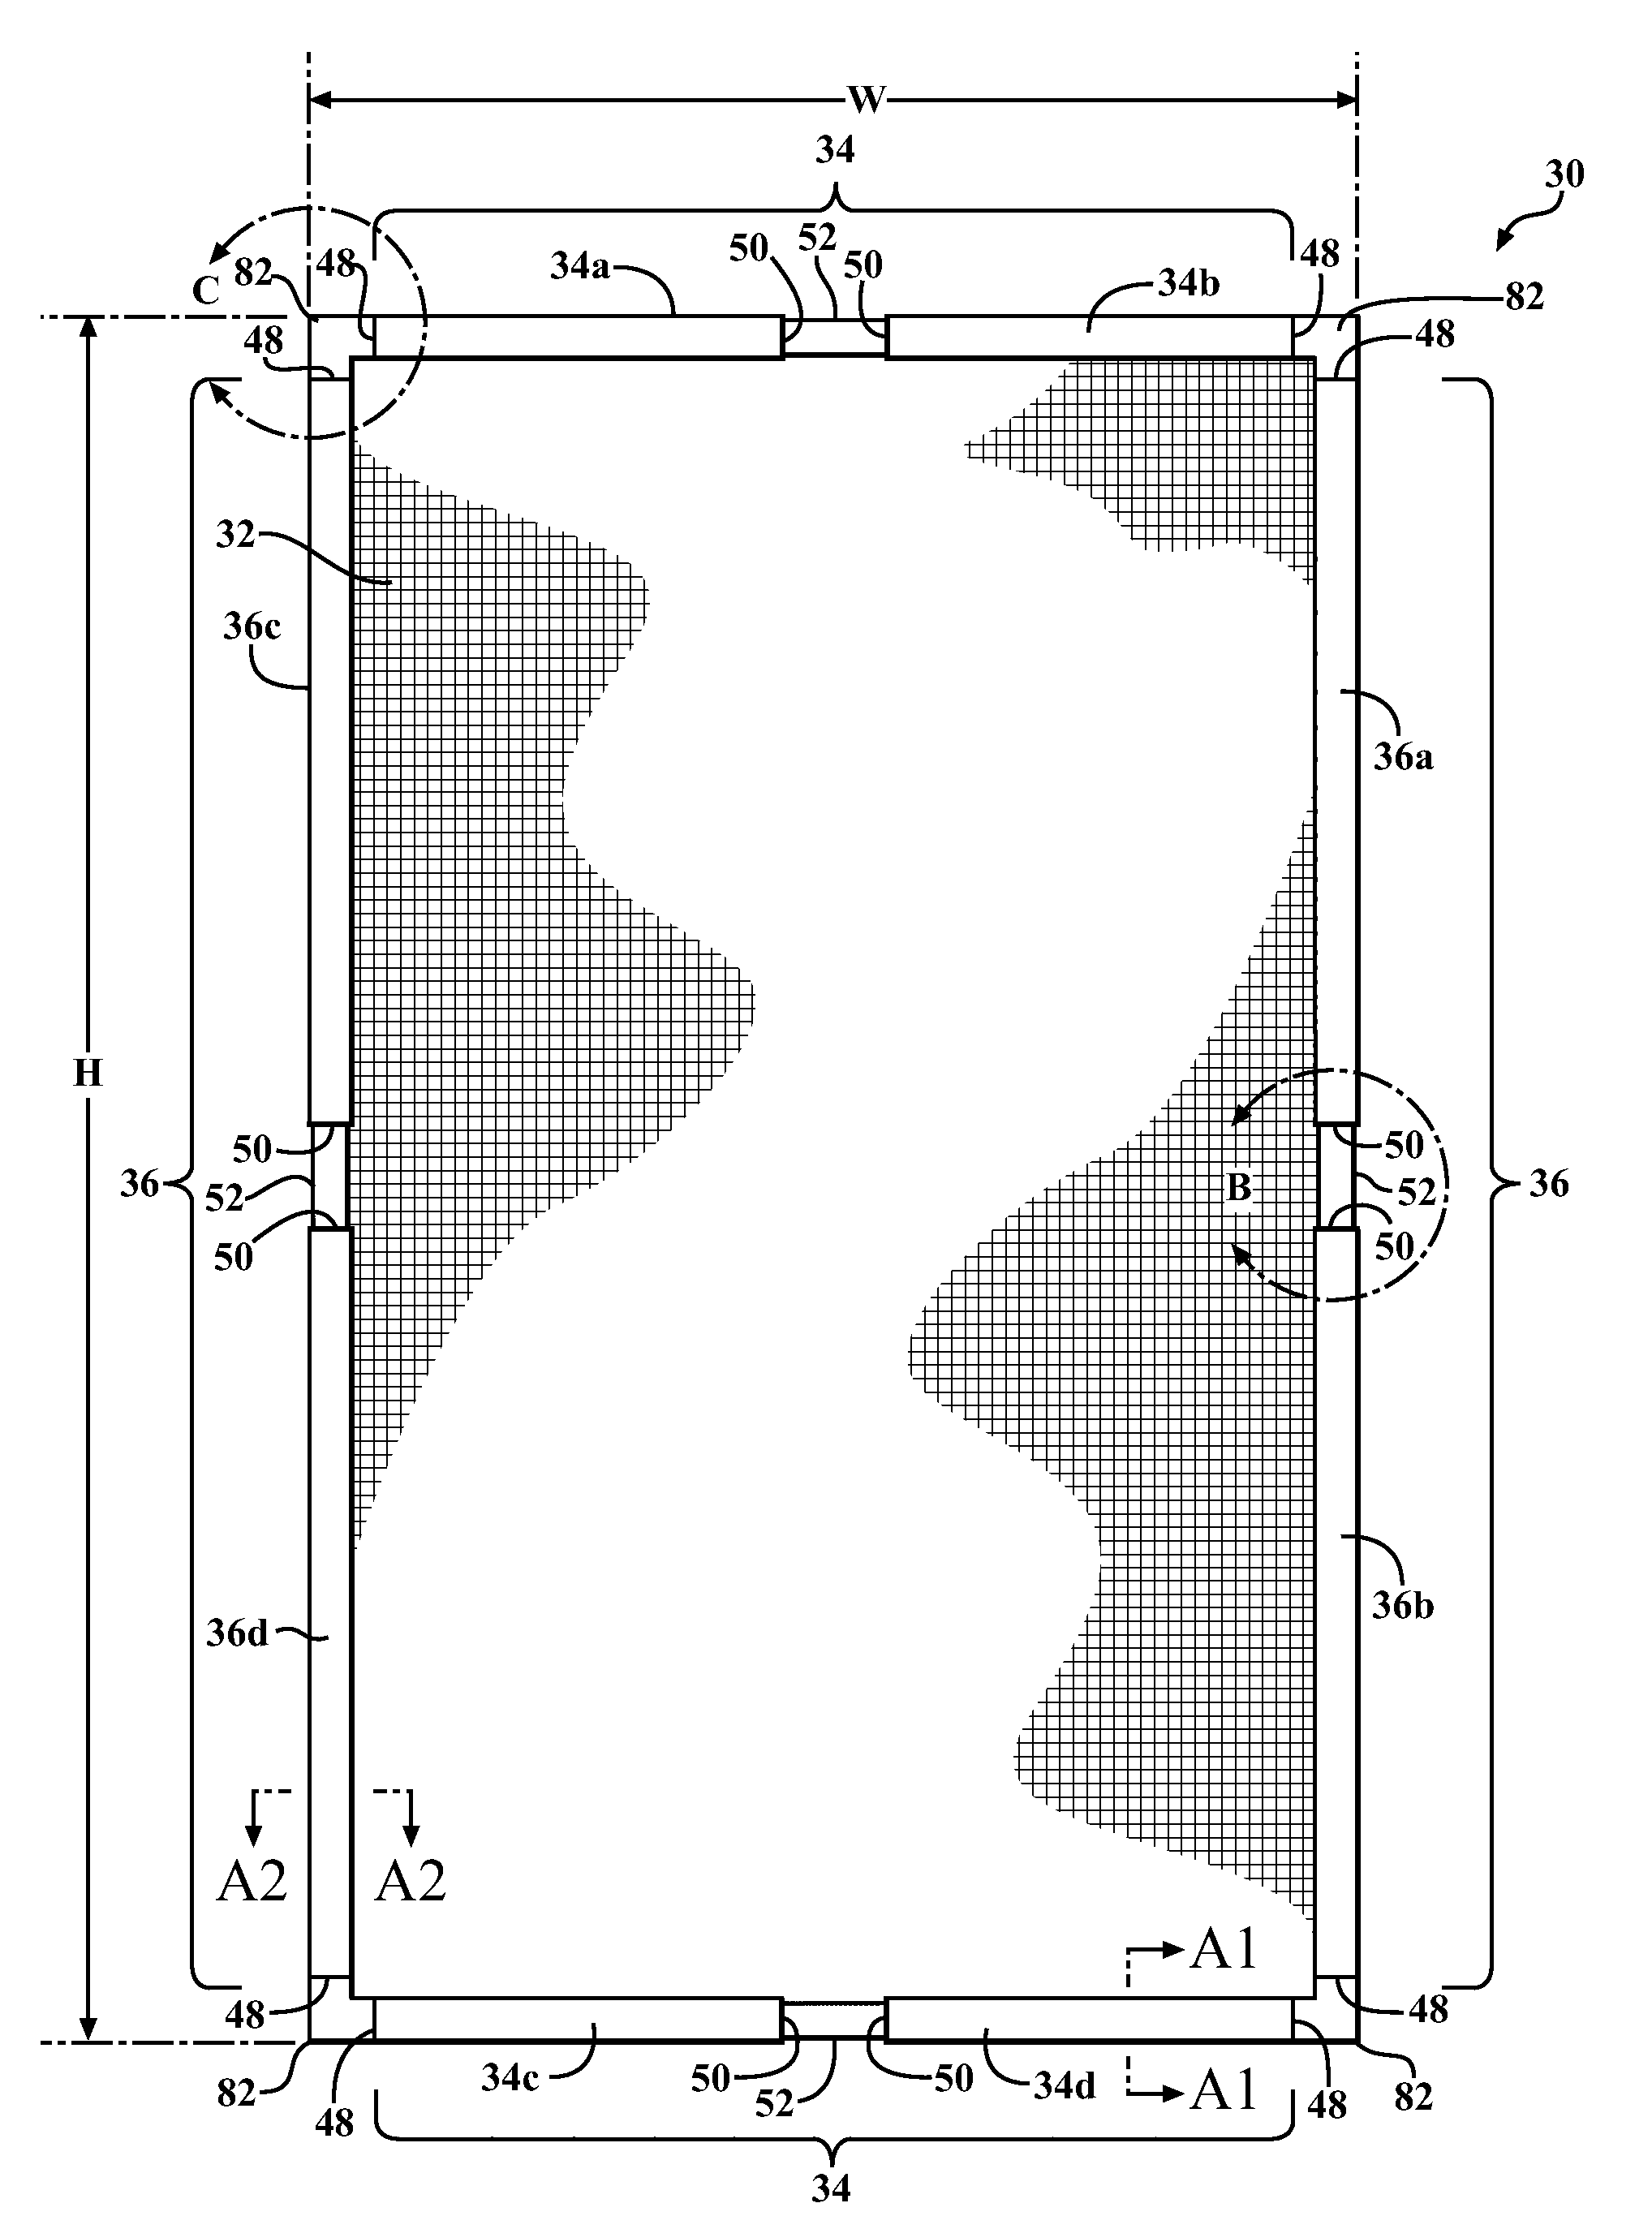 Adjustable frame assembly and method of assembling the adjustable frame assembly